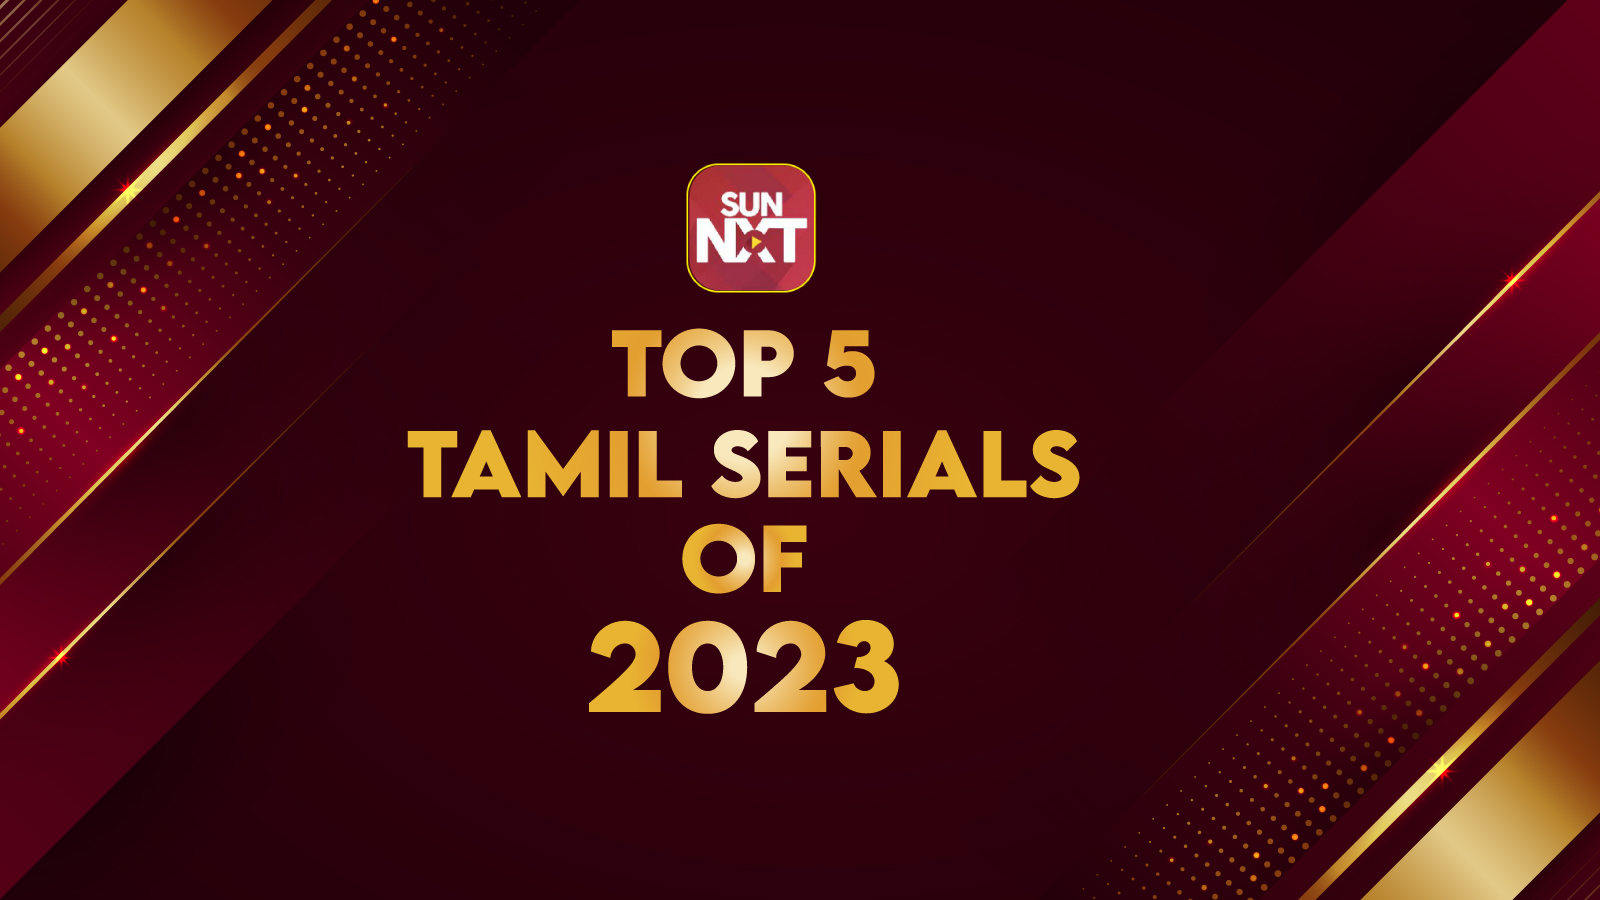 What are the top 5 Tamil TV serials on SunNXT App for 2023?